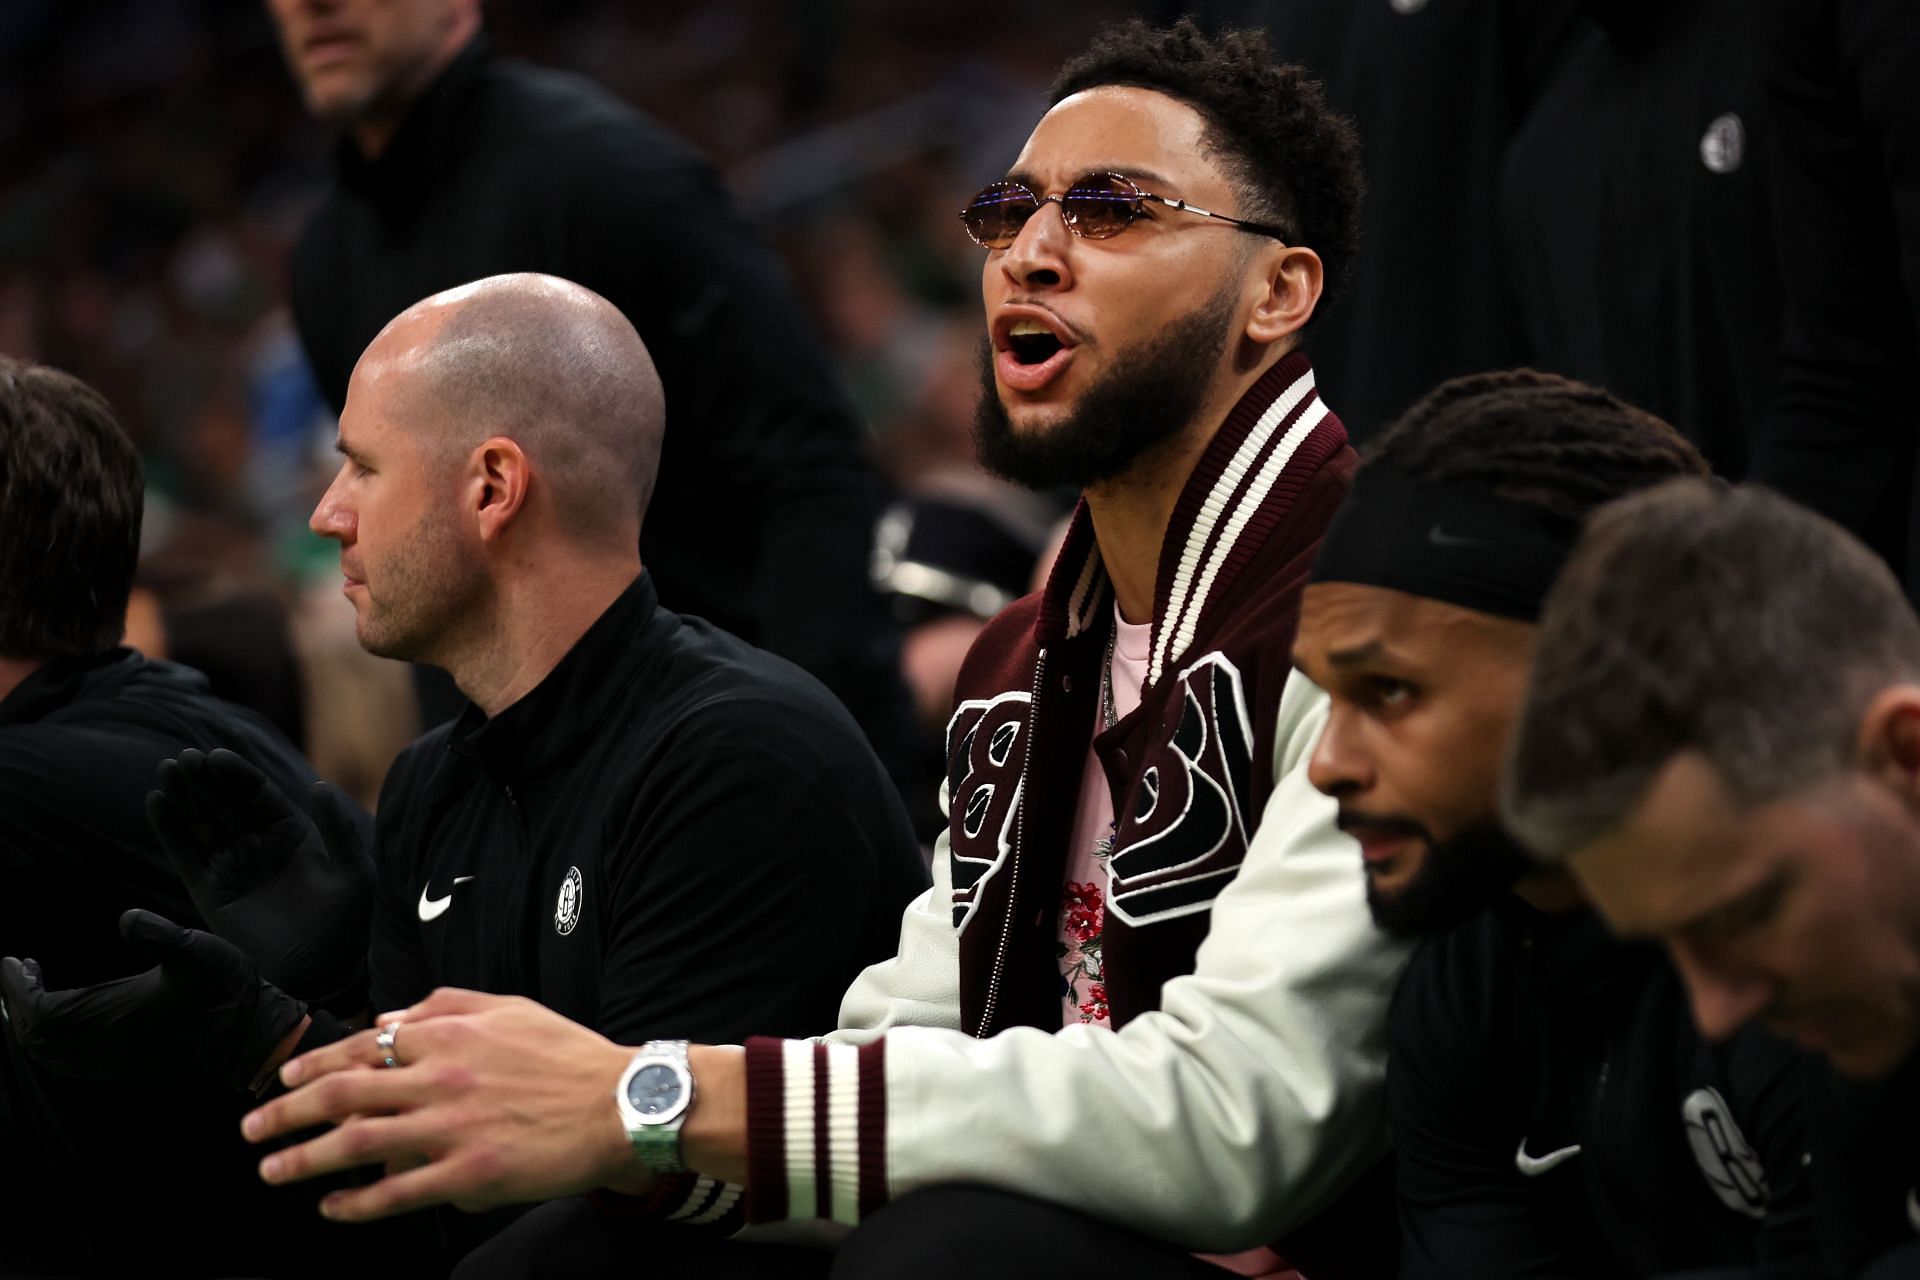 Simmons has been a constant name in NBA rumors.